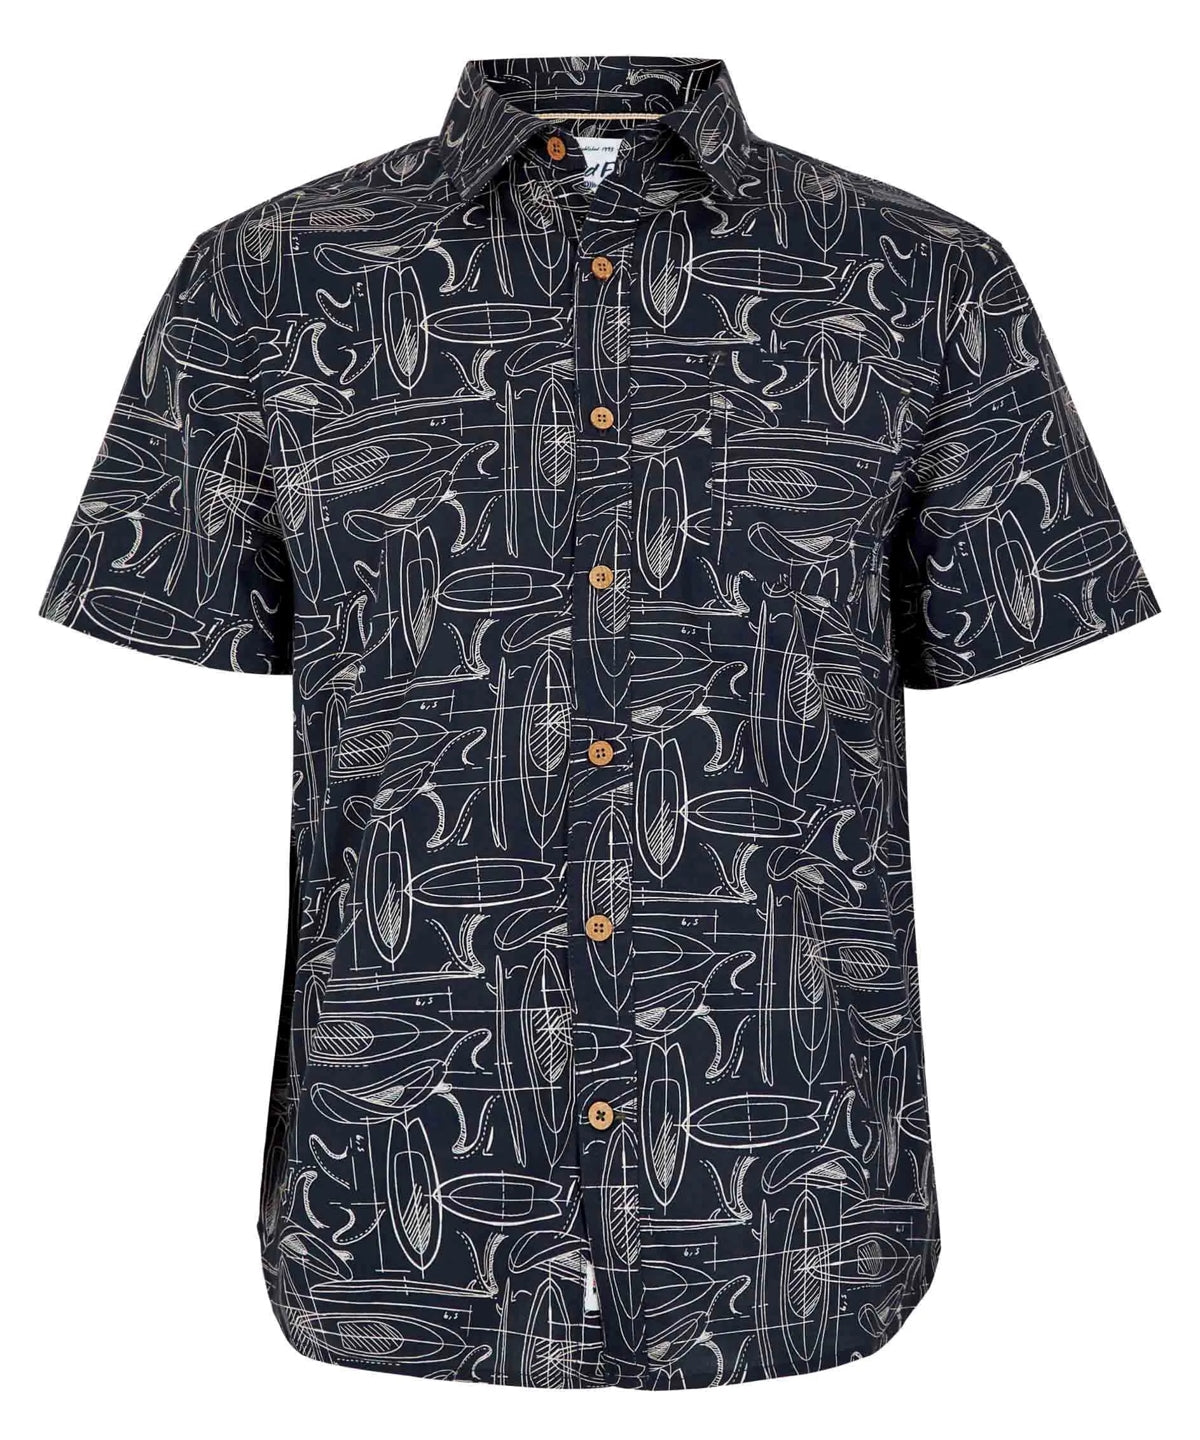 Weird Fish men's Faraway button down short sleeve shirt in Dark Navy with a linear paddle and surfboard print.